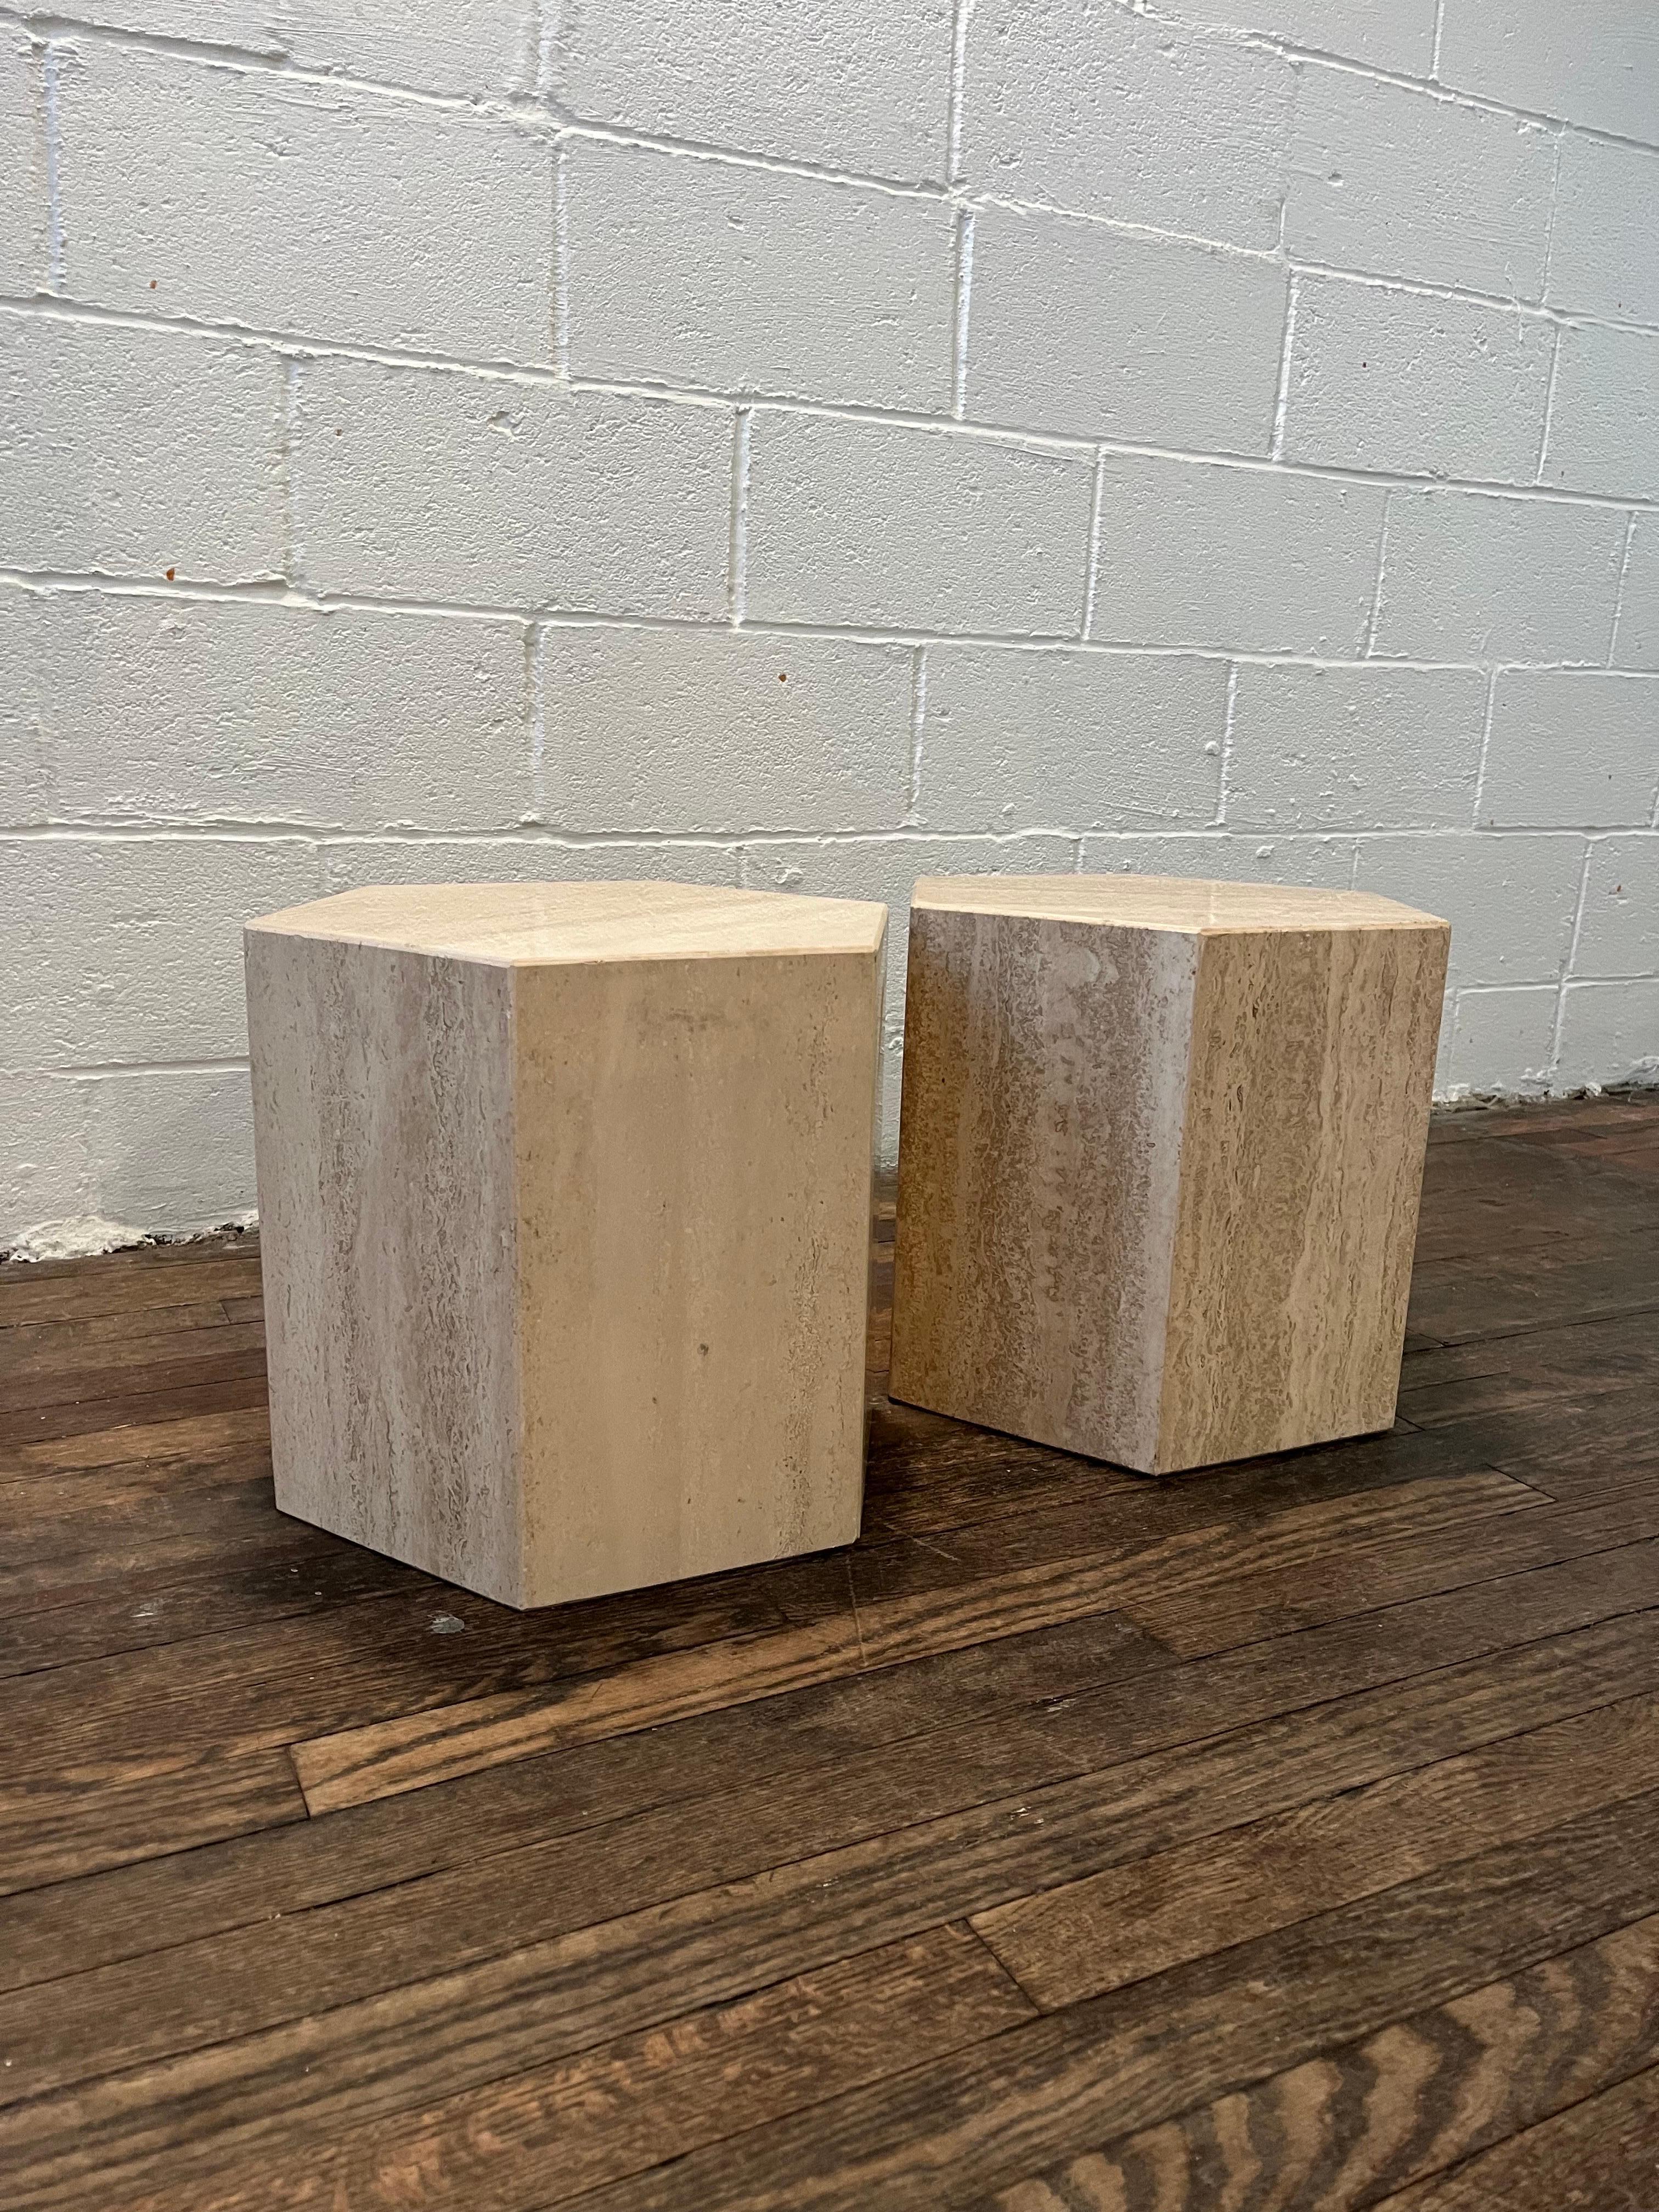 Pair of Mid-Century Modern travertine hexagon end tables pedestals.
Curbside to NYC/Philly $350